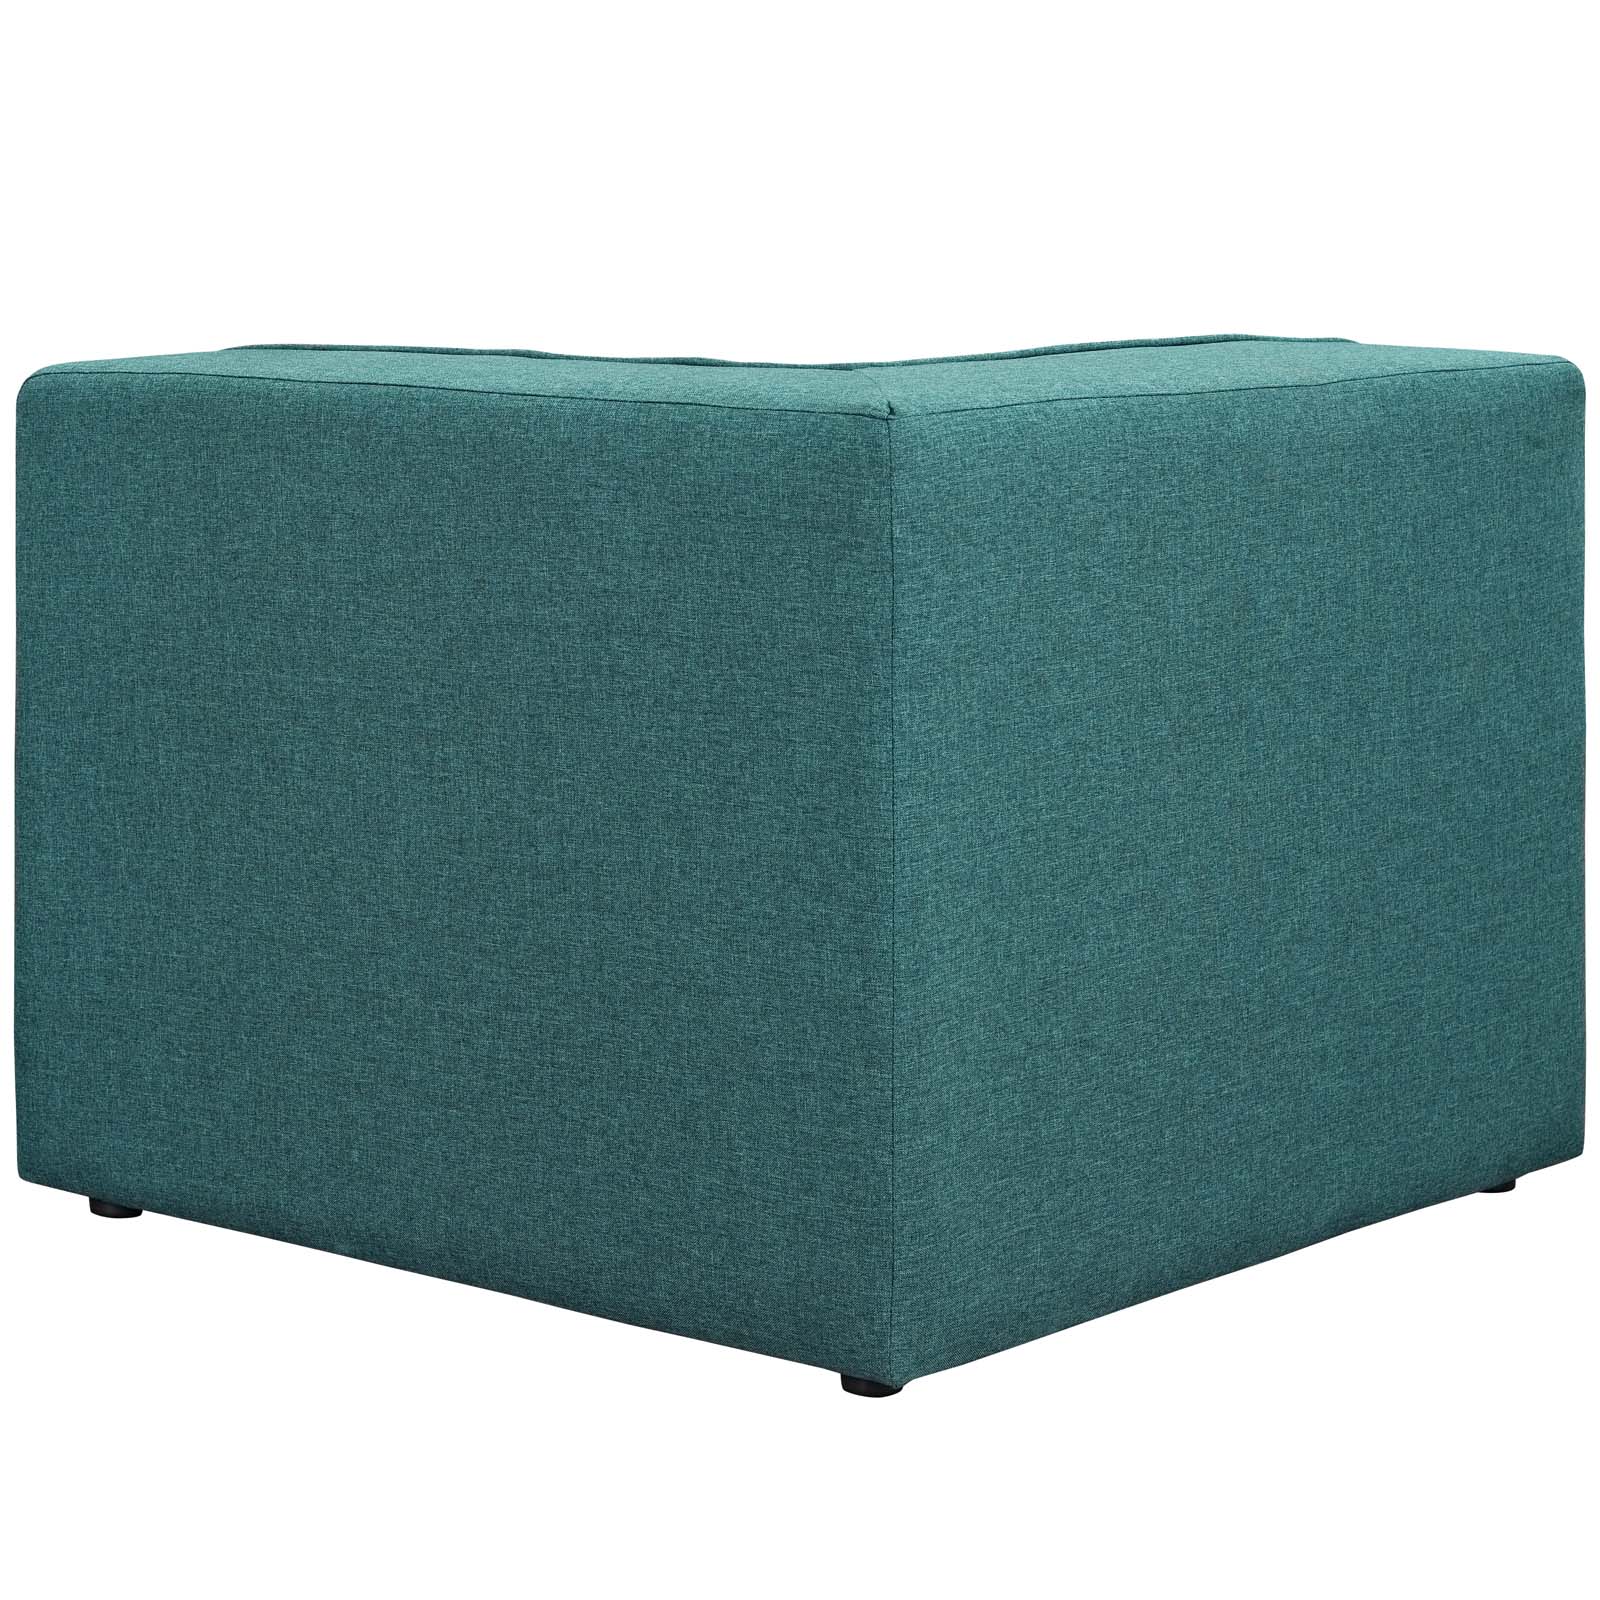 Modway Accent Chairs - Mingle Corner Sofa Teal